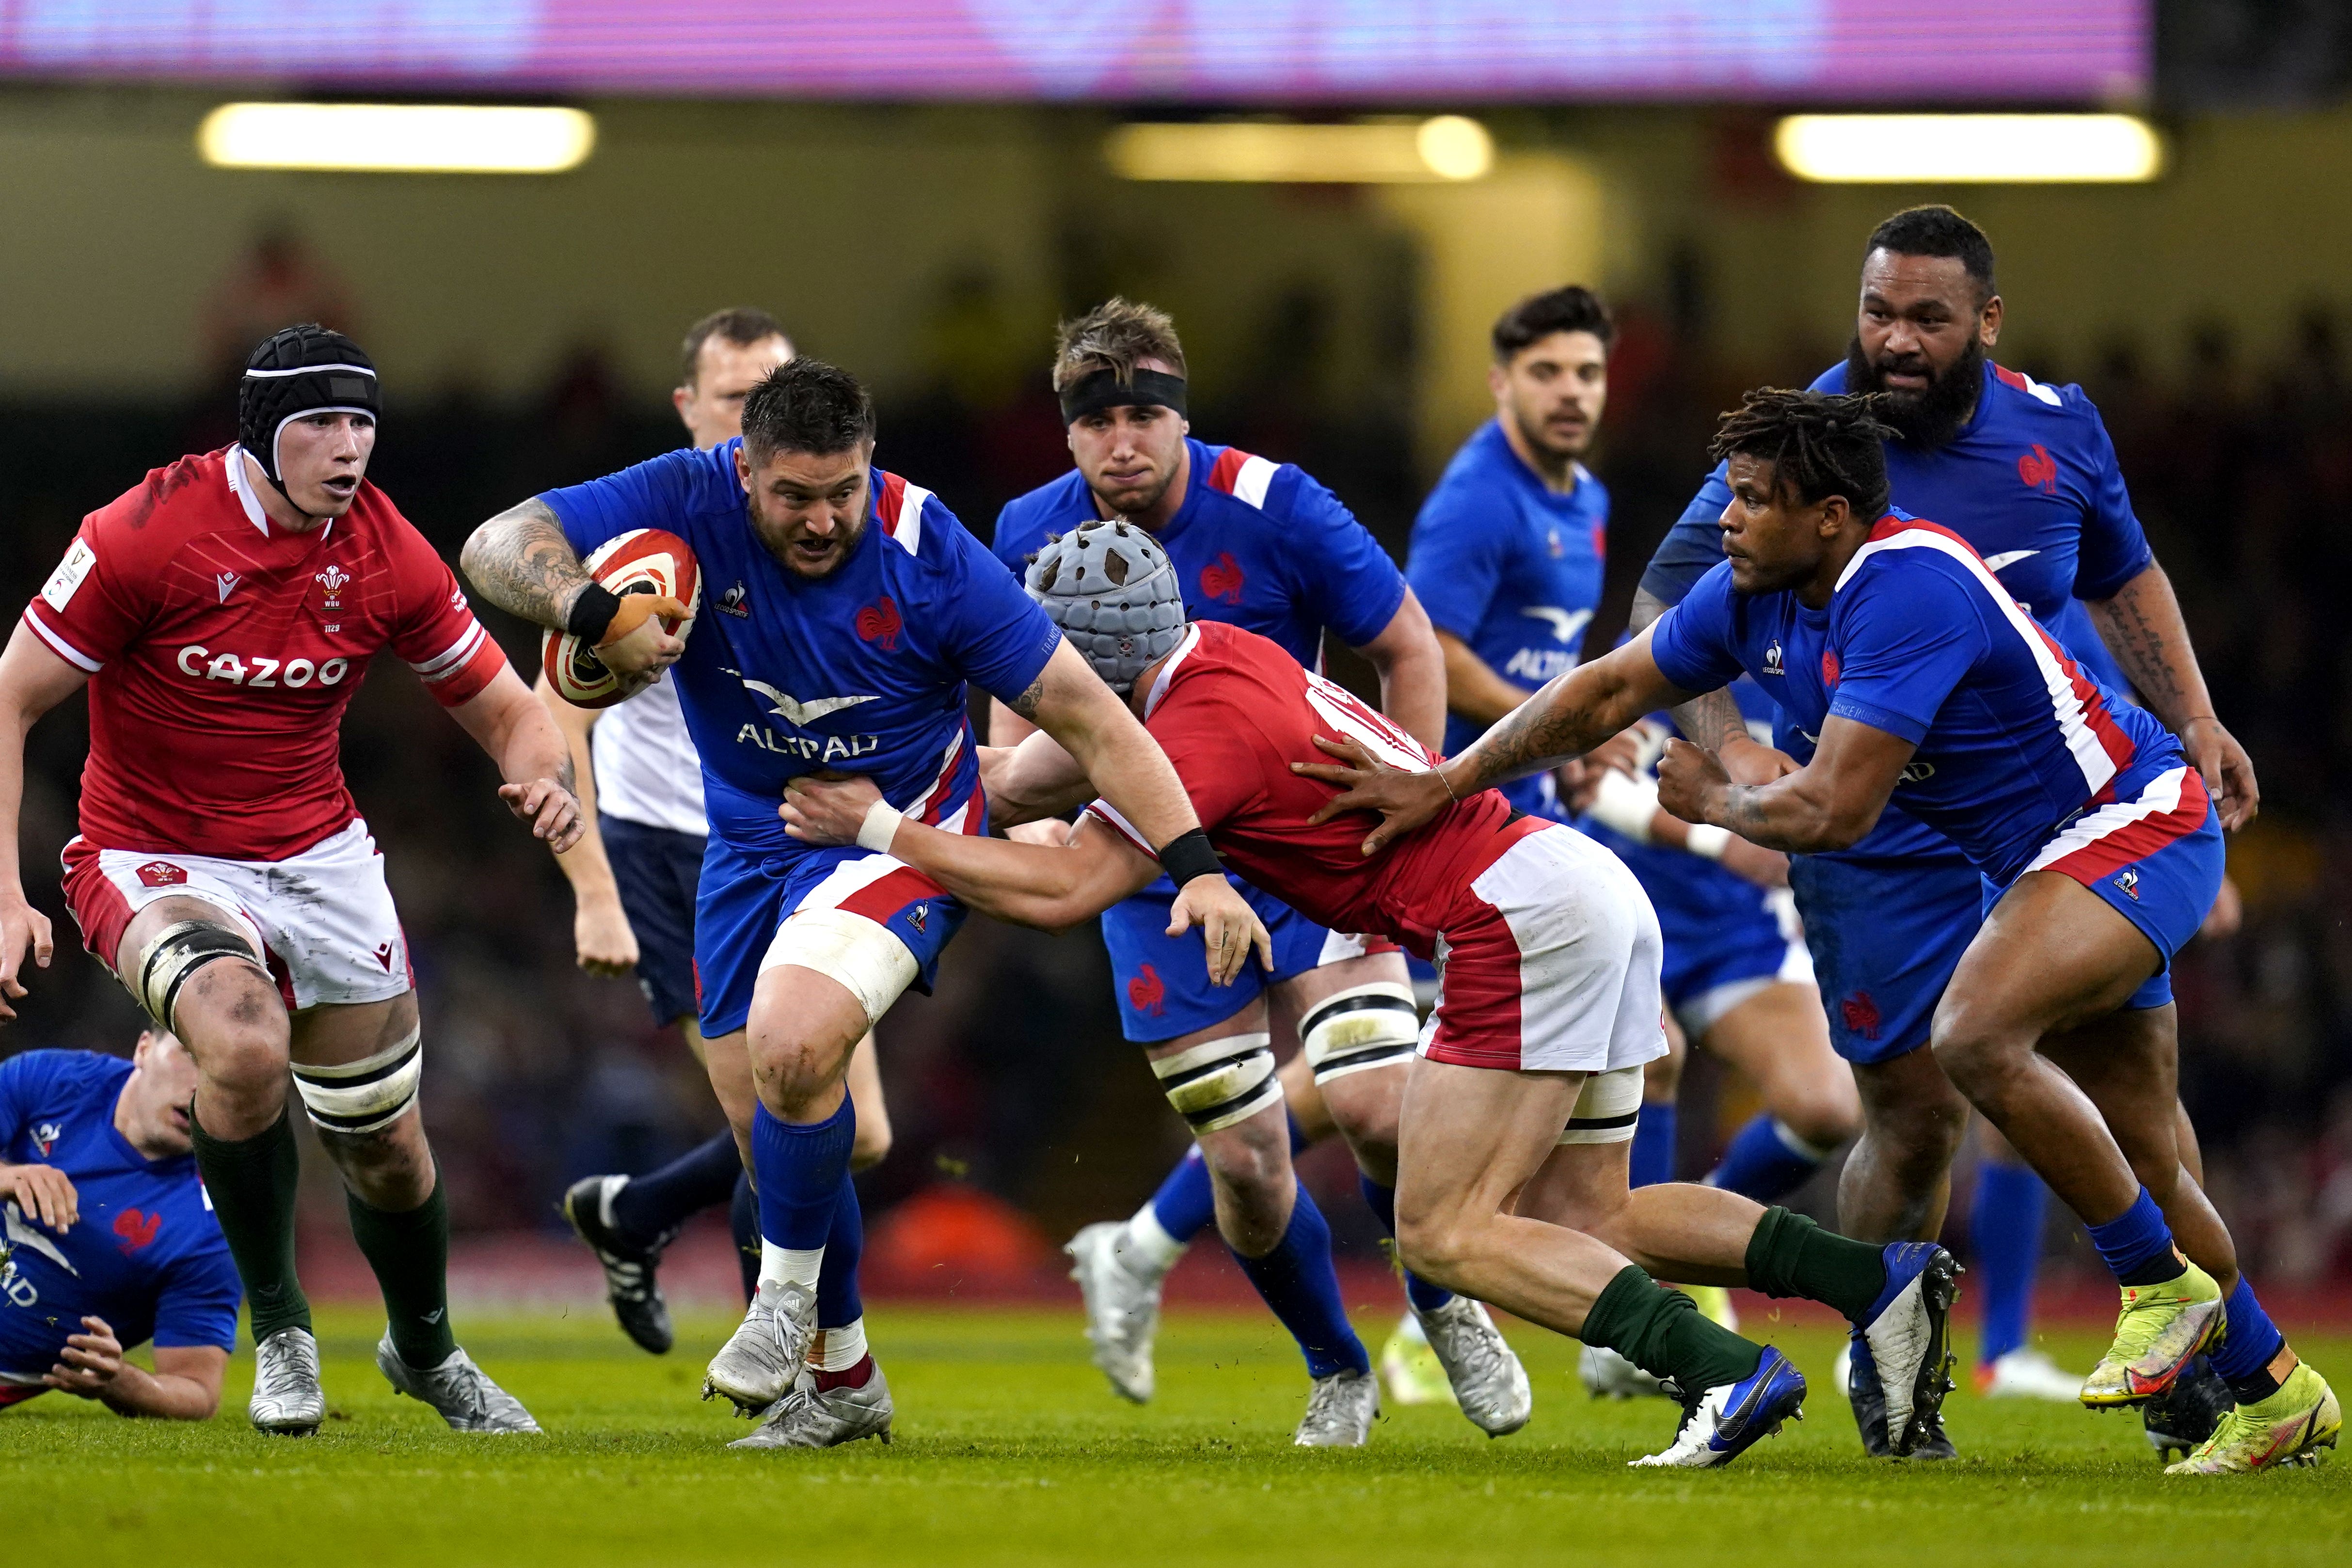 Wales and France will go head-to-head in Cardiff (Nick Potts/PA)